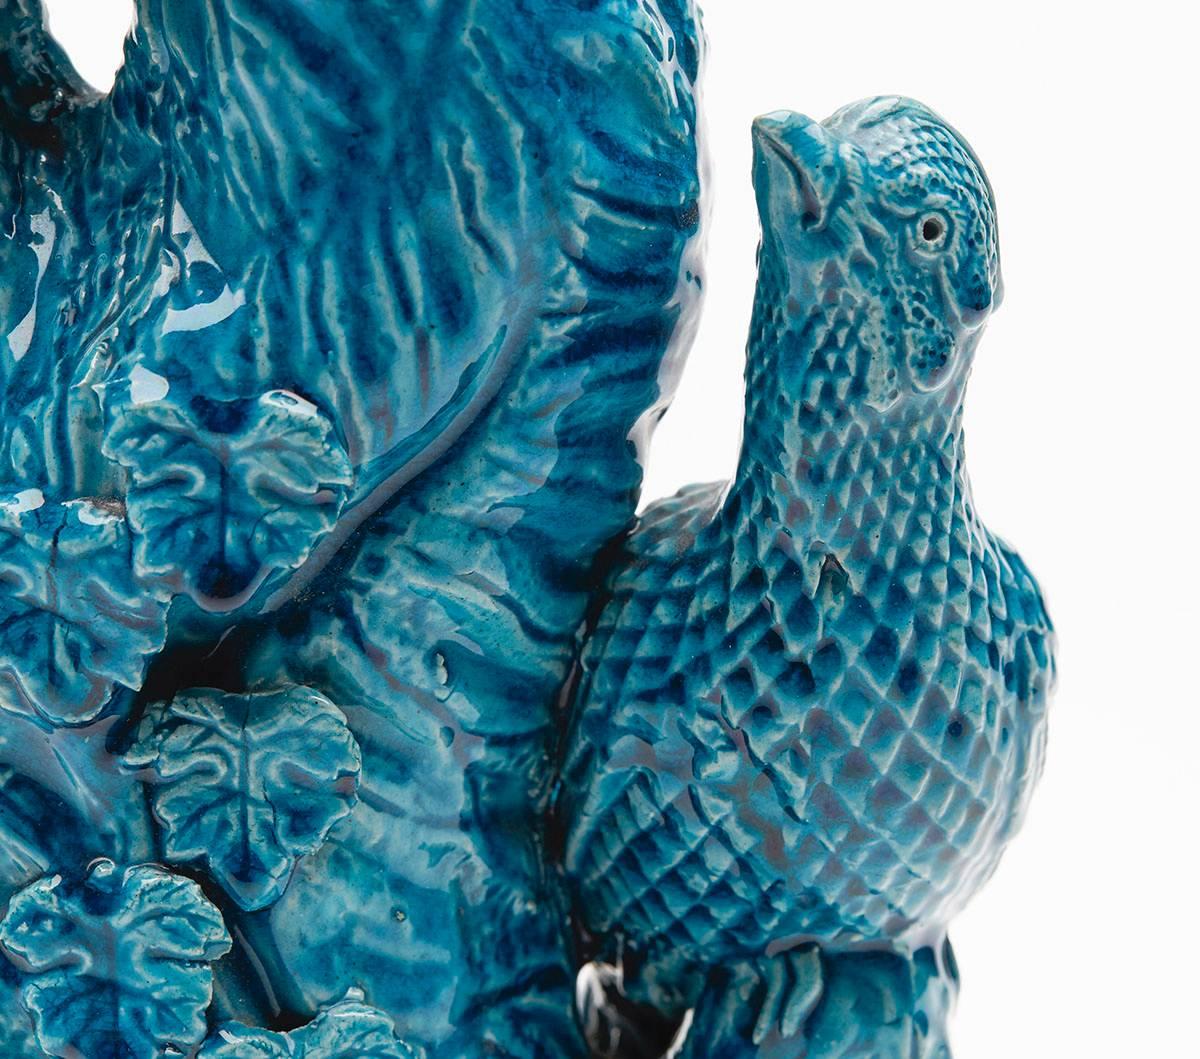 A fine antique Chinese vase modeled as a tree stem applied with leaves with a male and female pheasant like birds perched on branches and looking at each other. The vase is decorated in deep turquoise blue glazes and has an unglazed base and is not